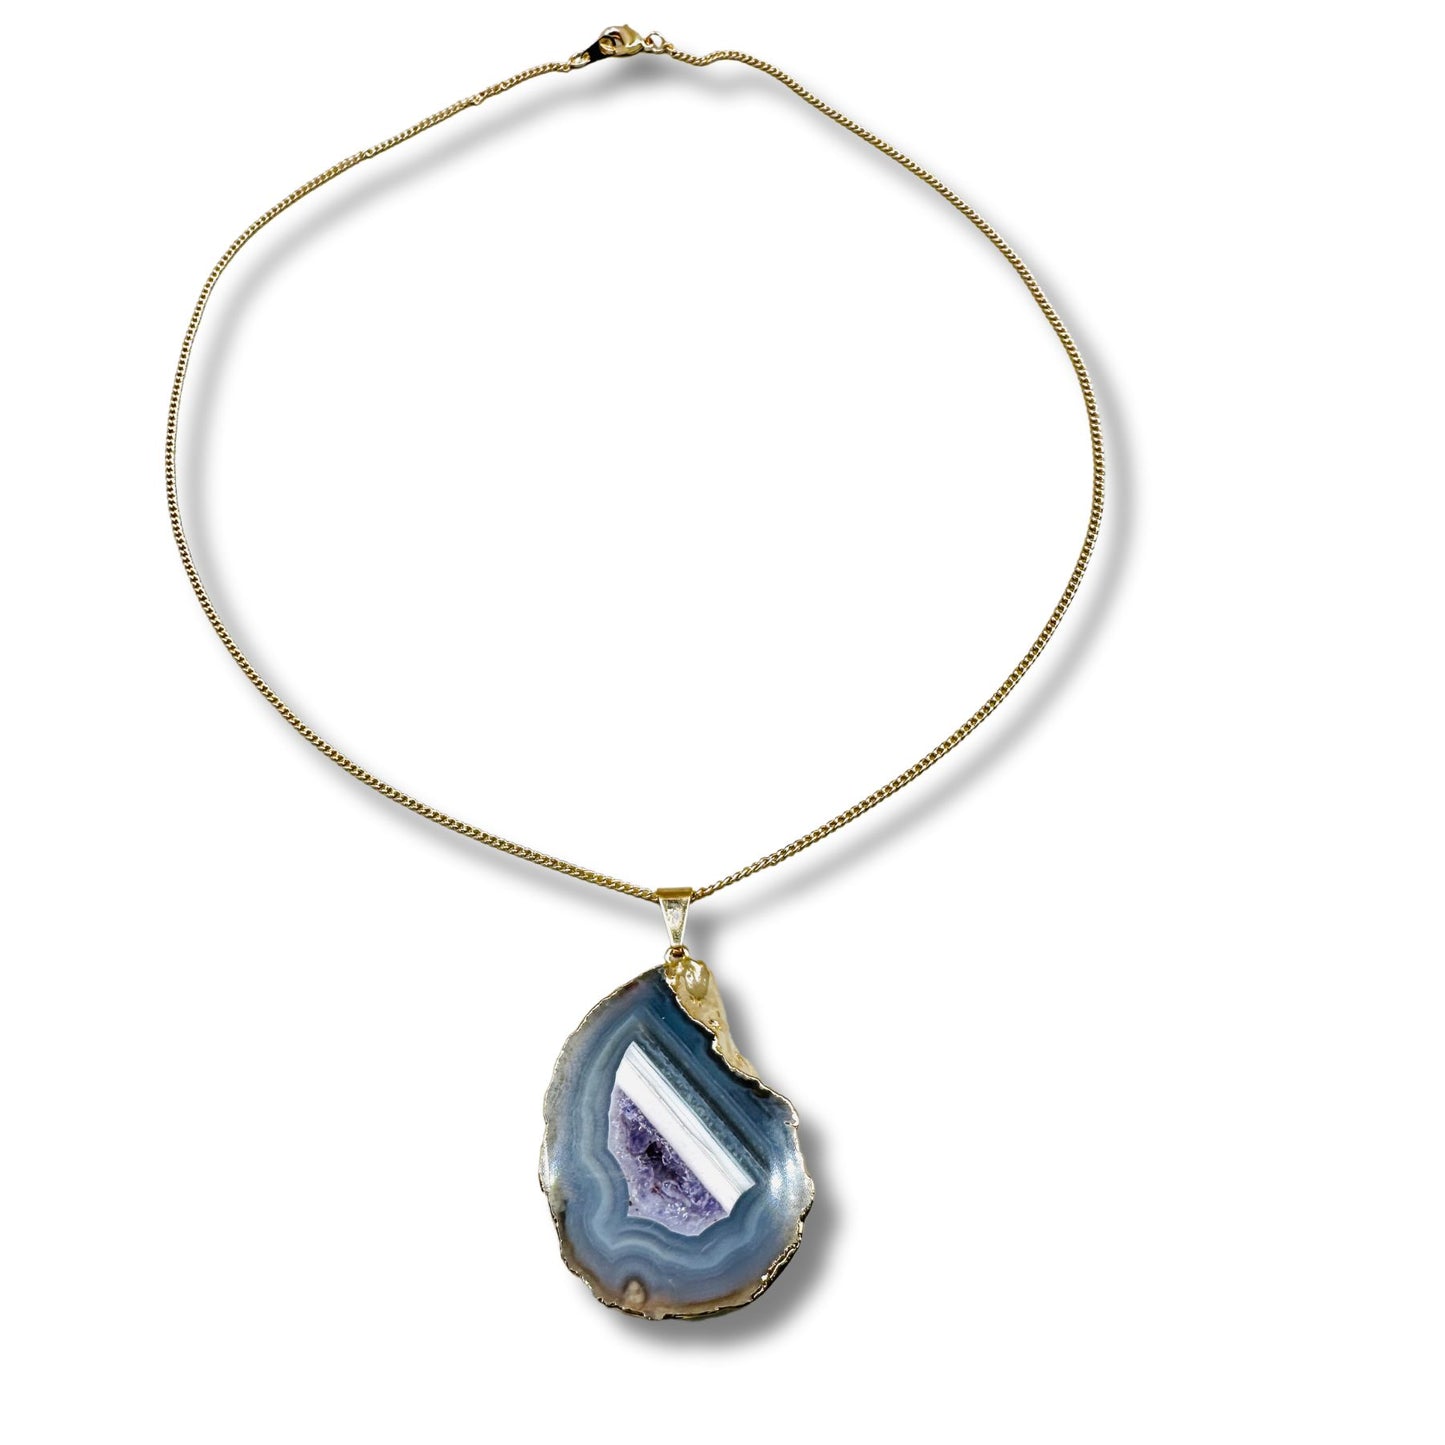 Stunning Agate Lavender and White Electroformed Necklace